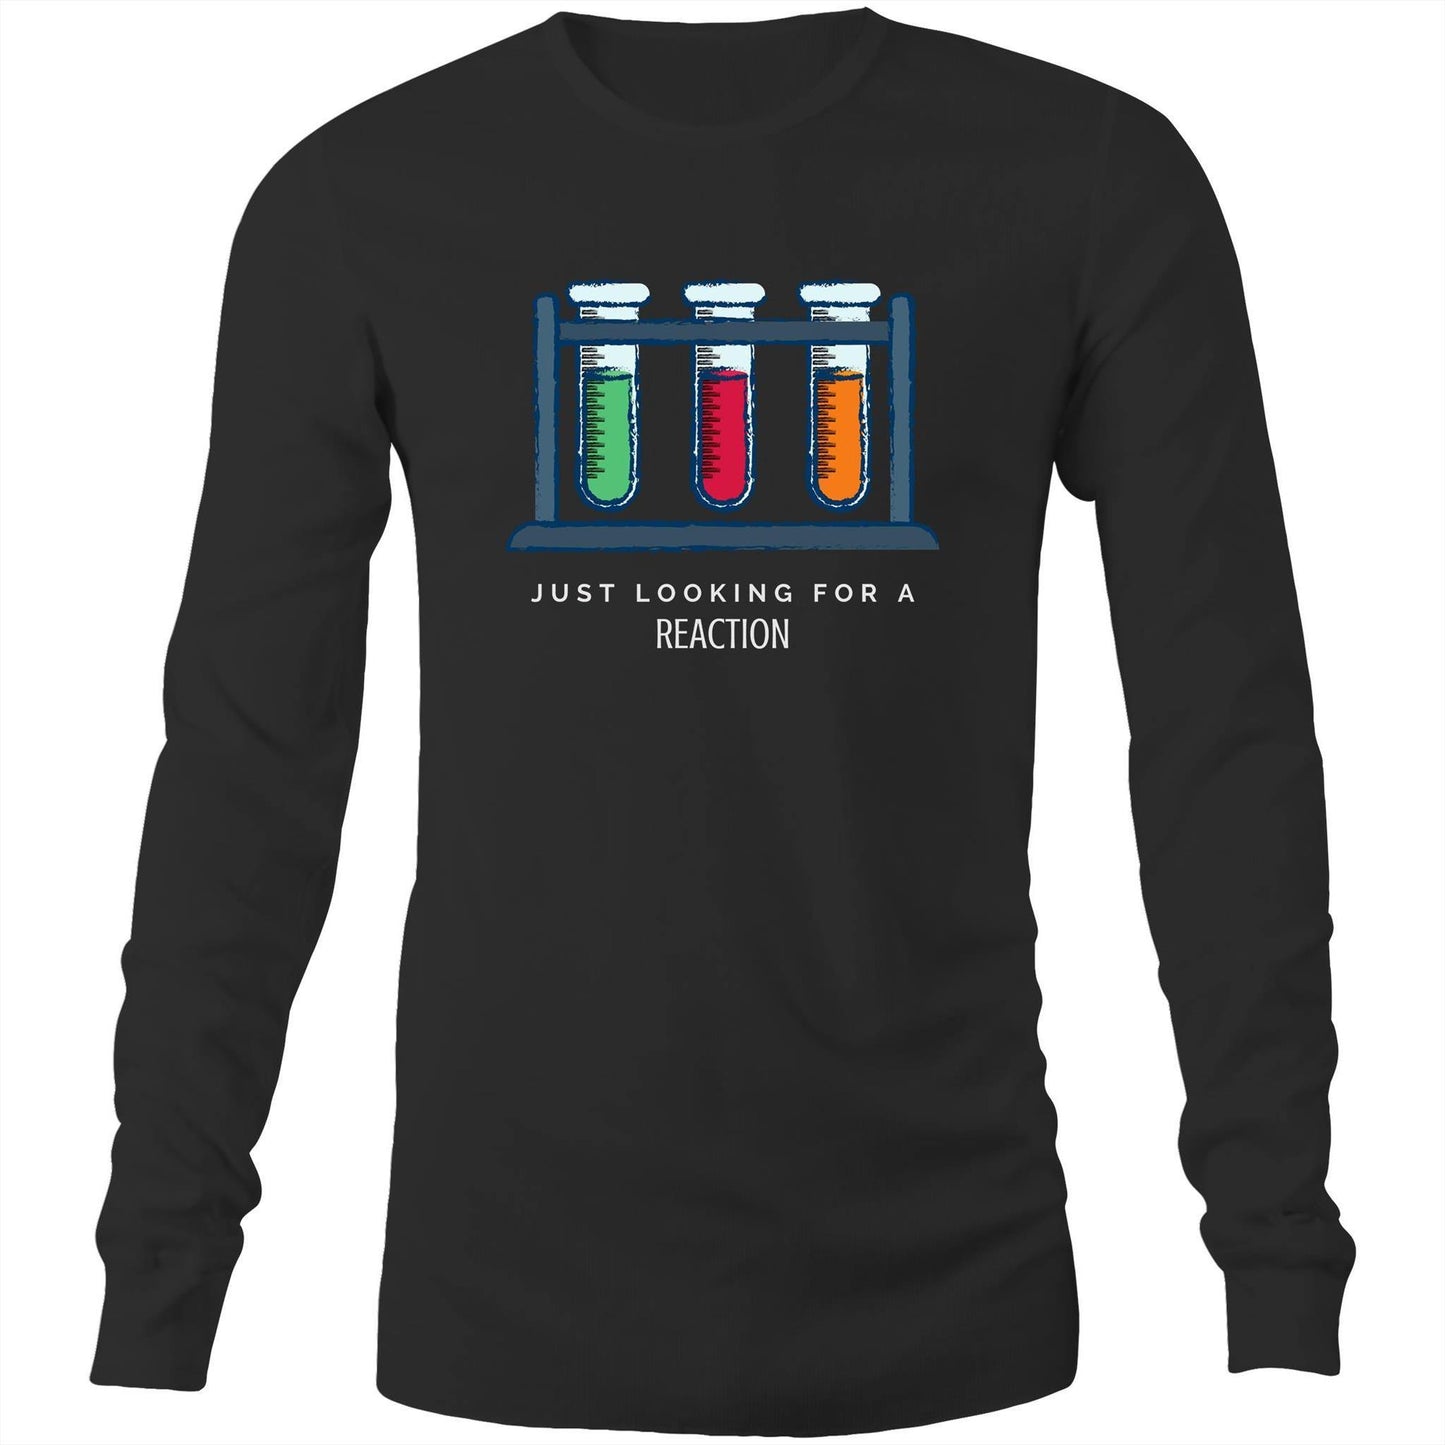 Just Looking For A Reaction - Long Sleeve T-Shirt Black Unisex Long Sleeve T-shirt Mens Science Womens